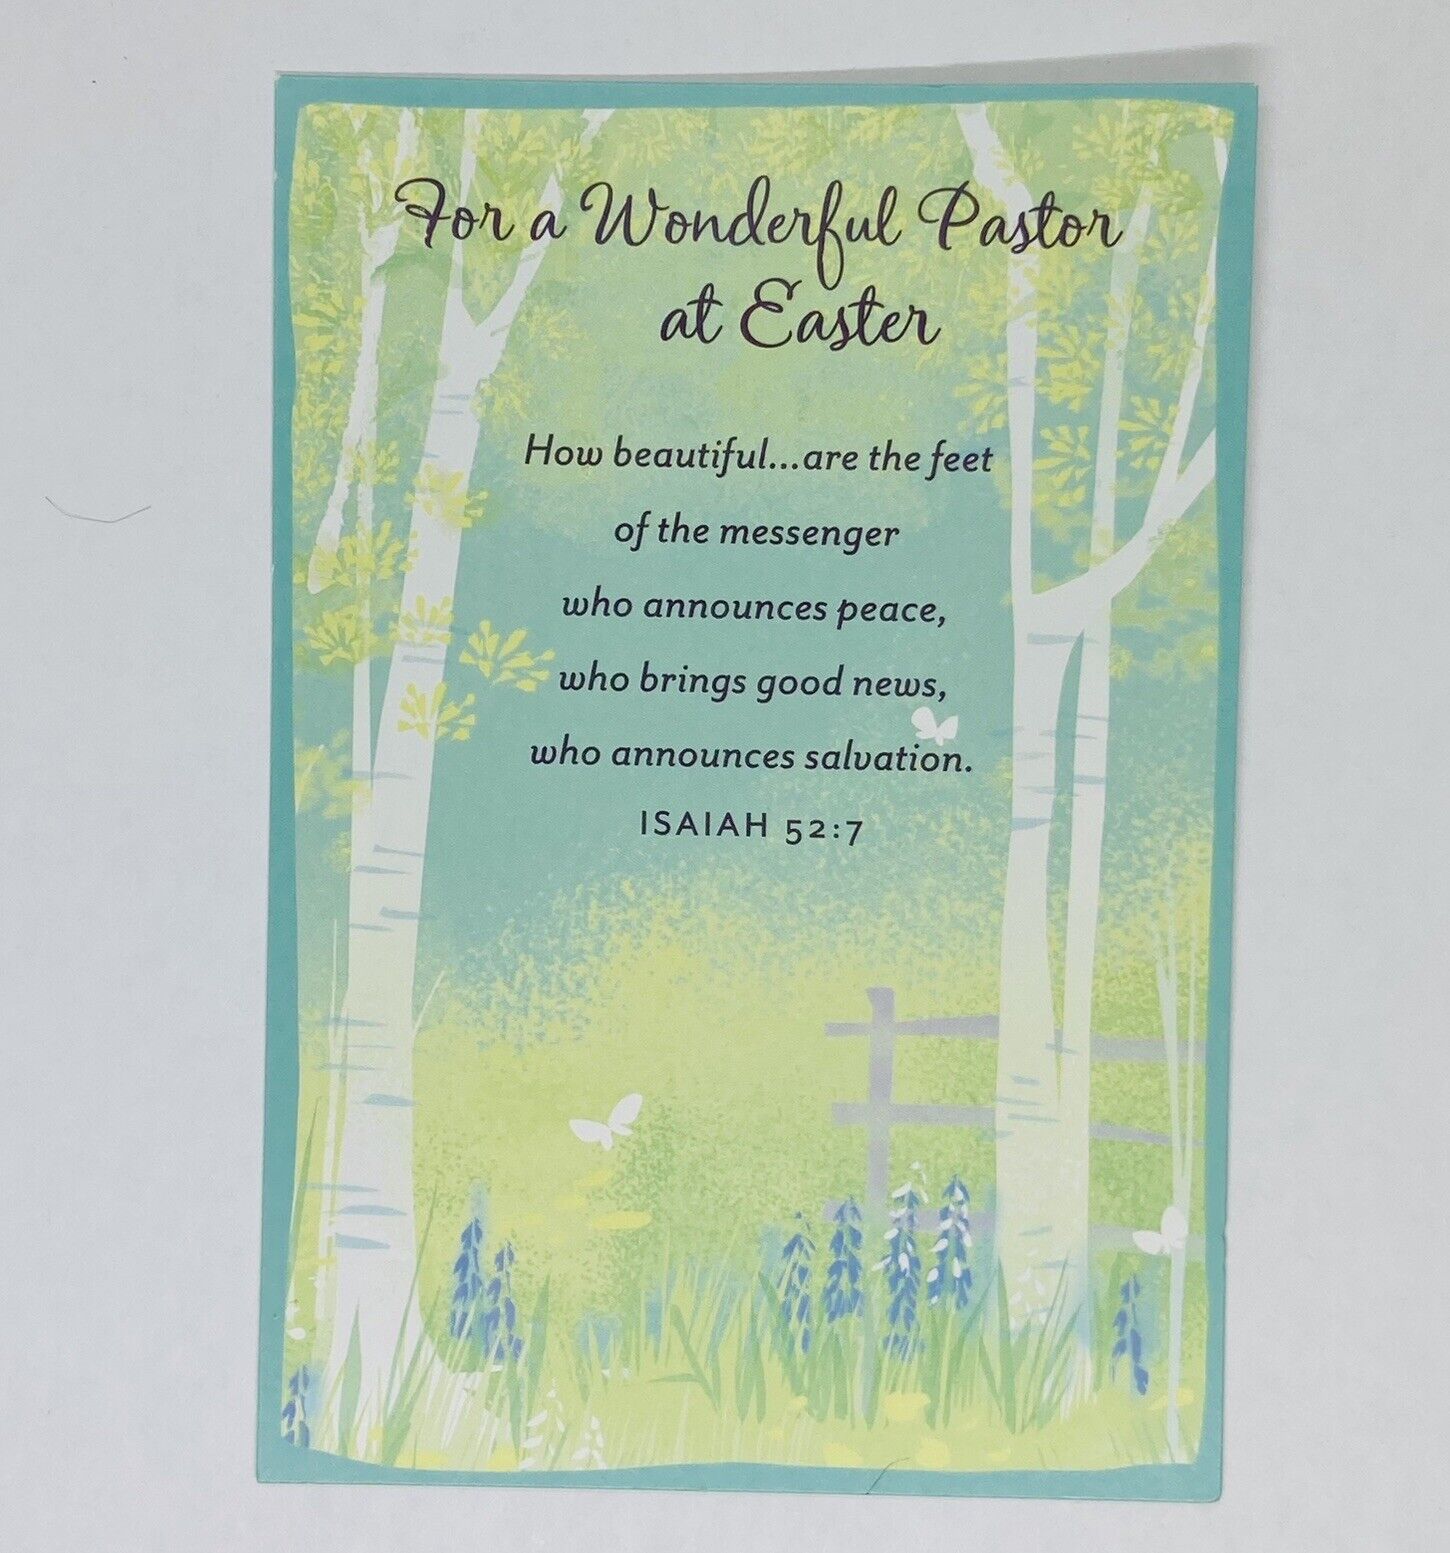 VTG Hallmark Easter Card For Wonderful Pastor “Serve With Grace And Caring” P3